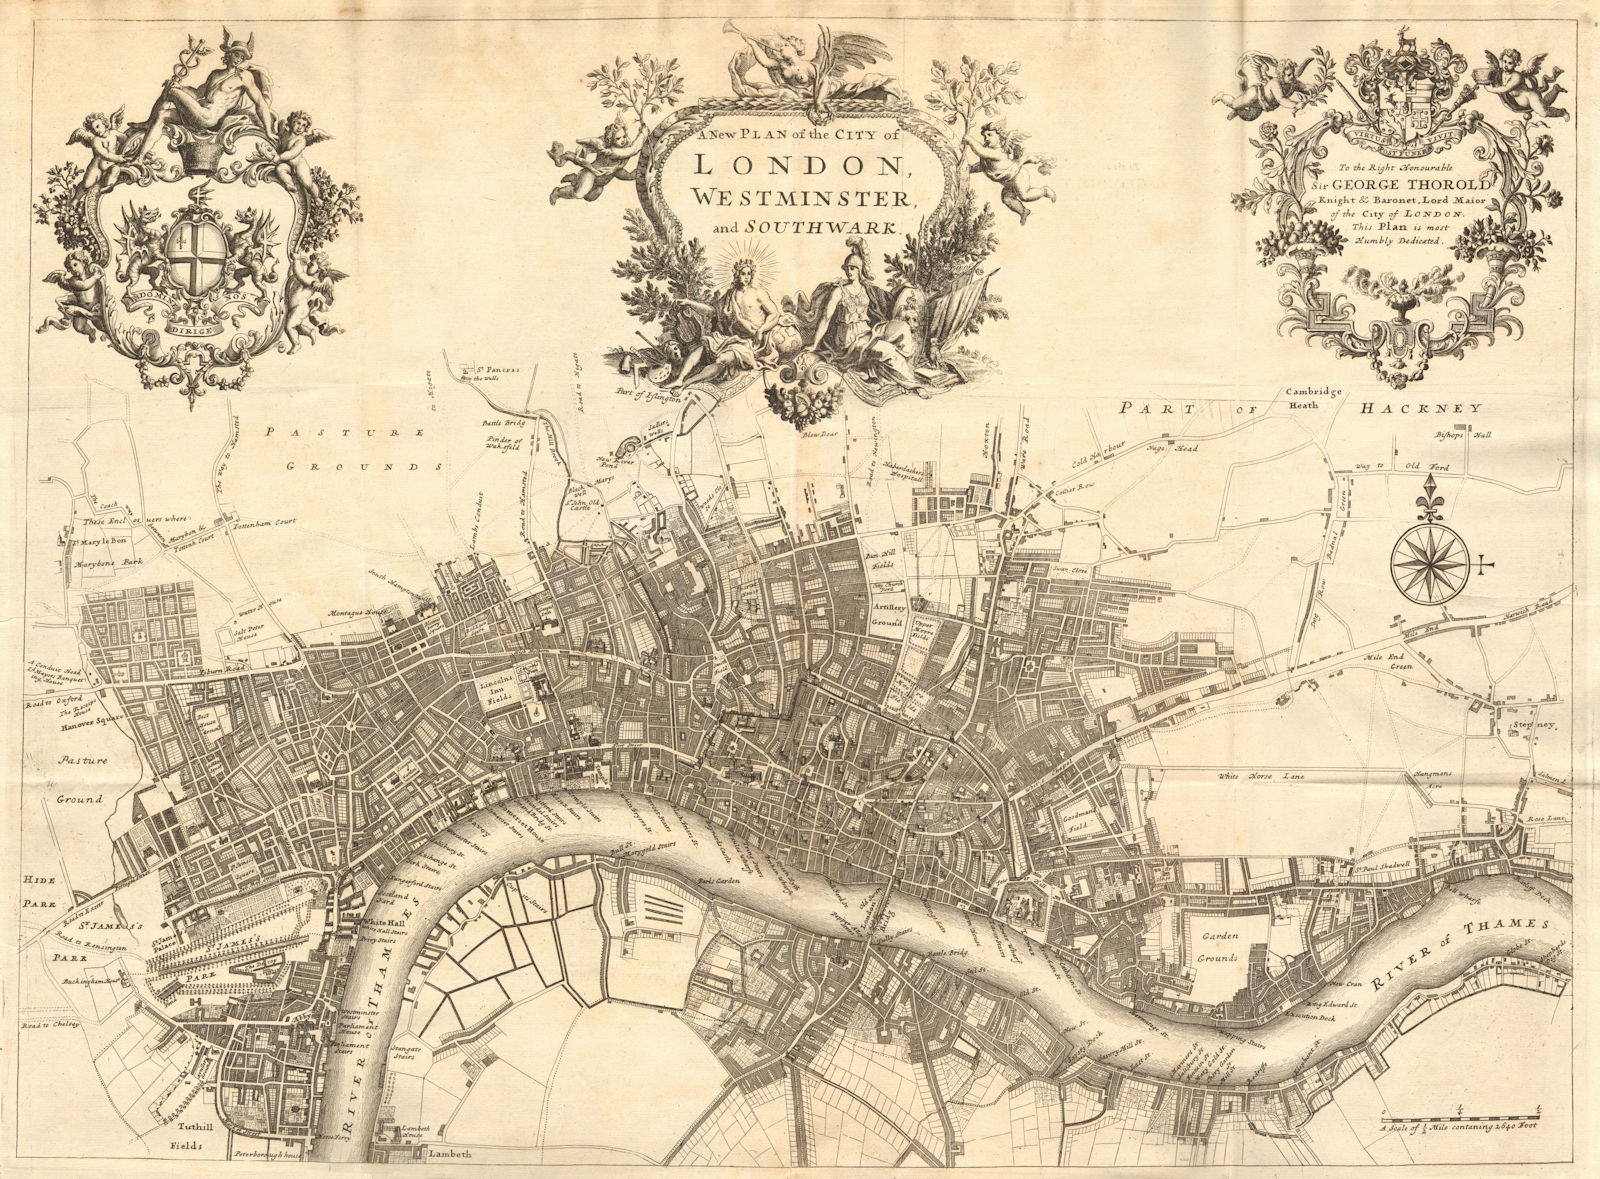 'New Plan of the City of London, Westminster & Southwark '. STOW/STRYPE 1720 map